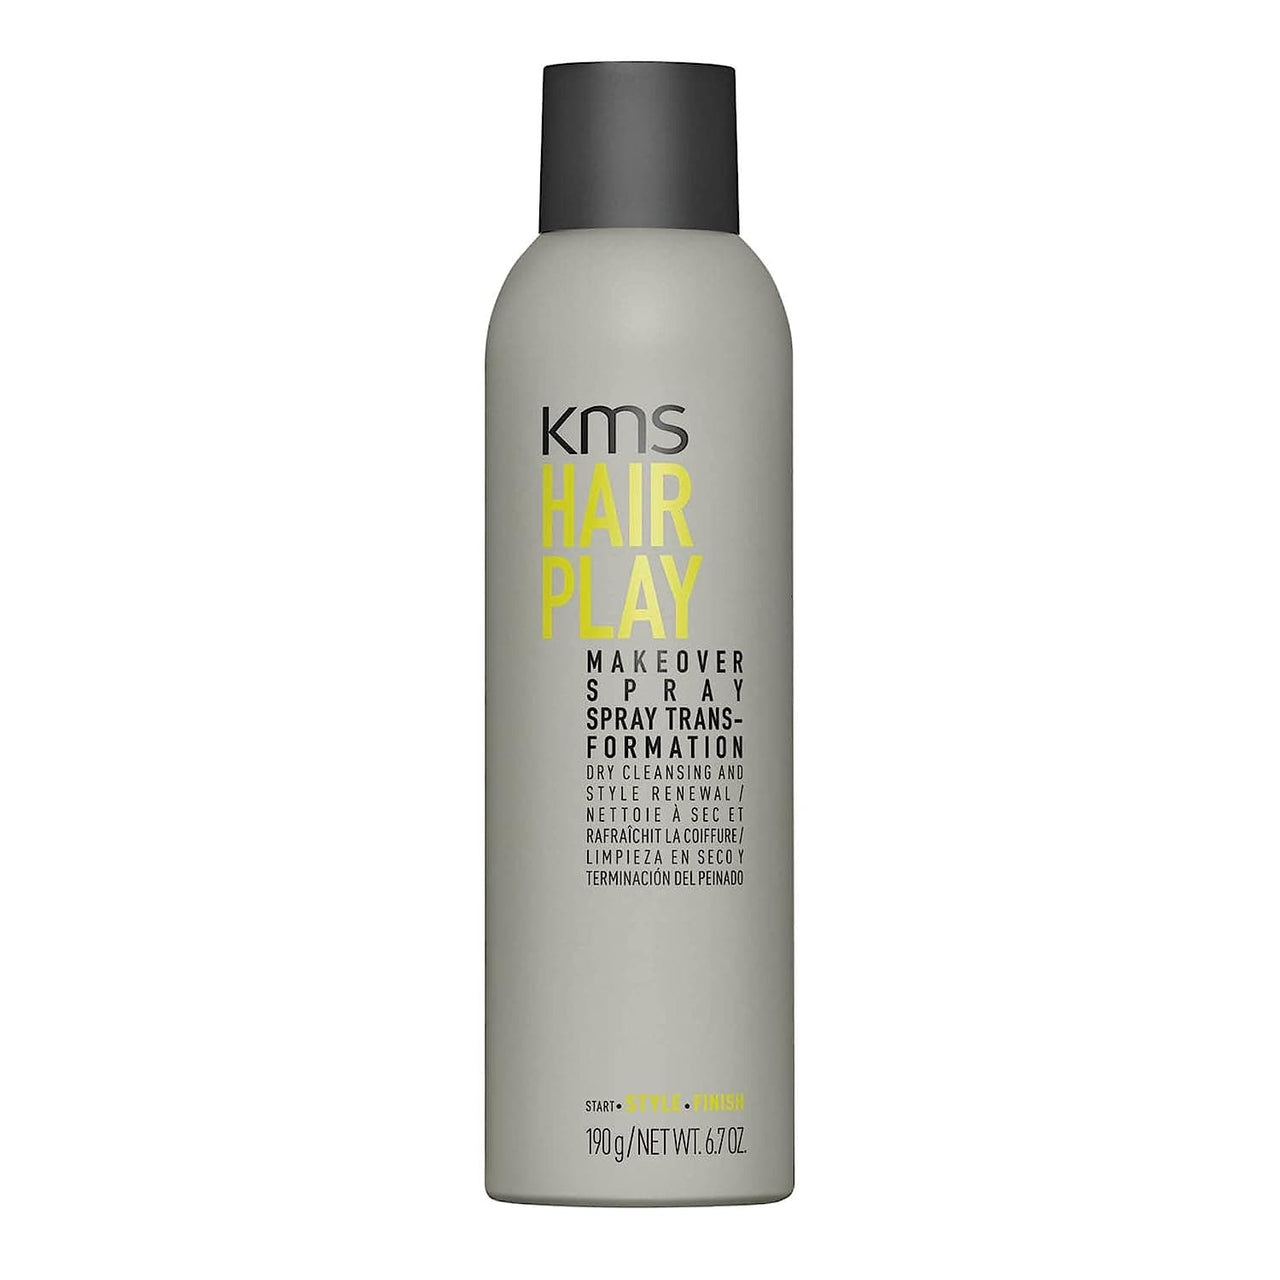 KMS_Hairplay Makeover Spray_Cosmetic World